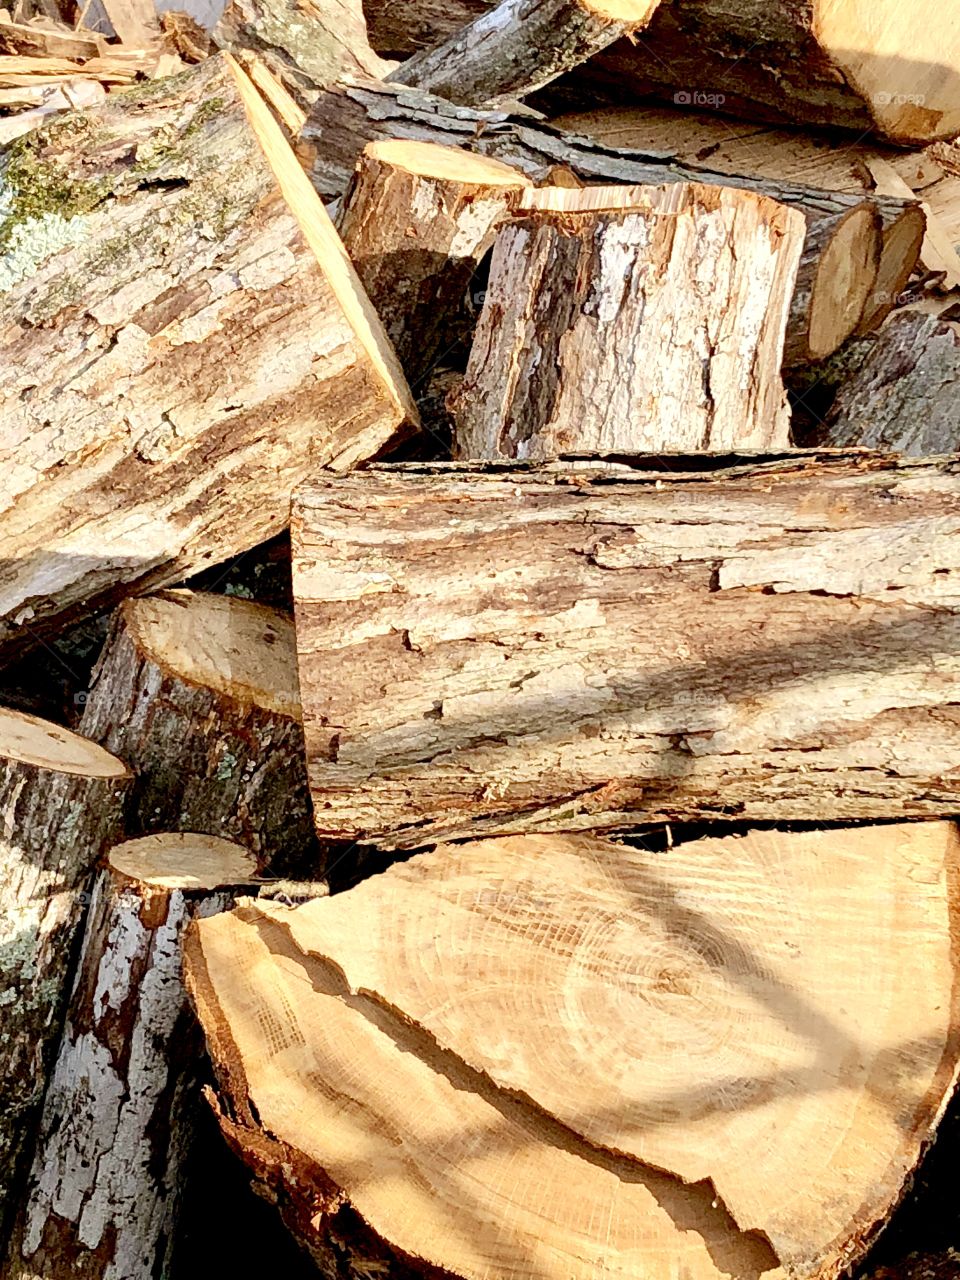 Chopped wood for the fire